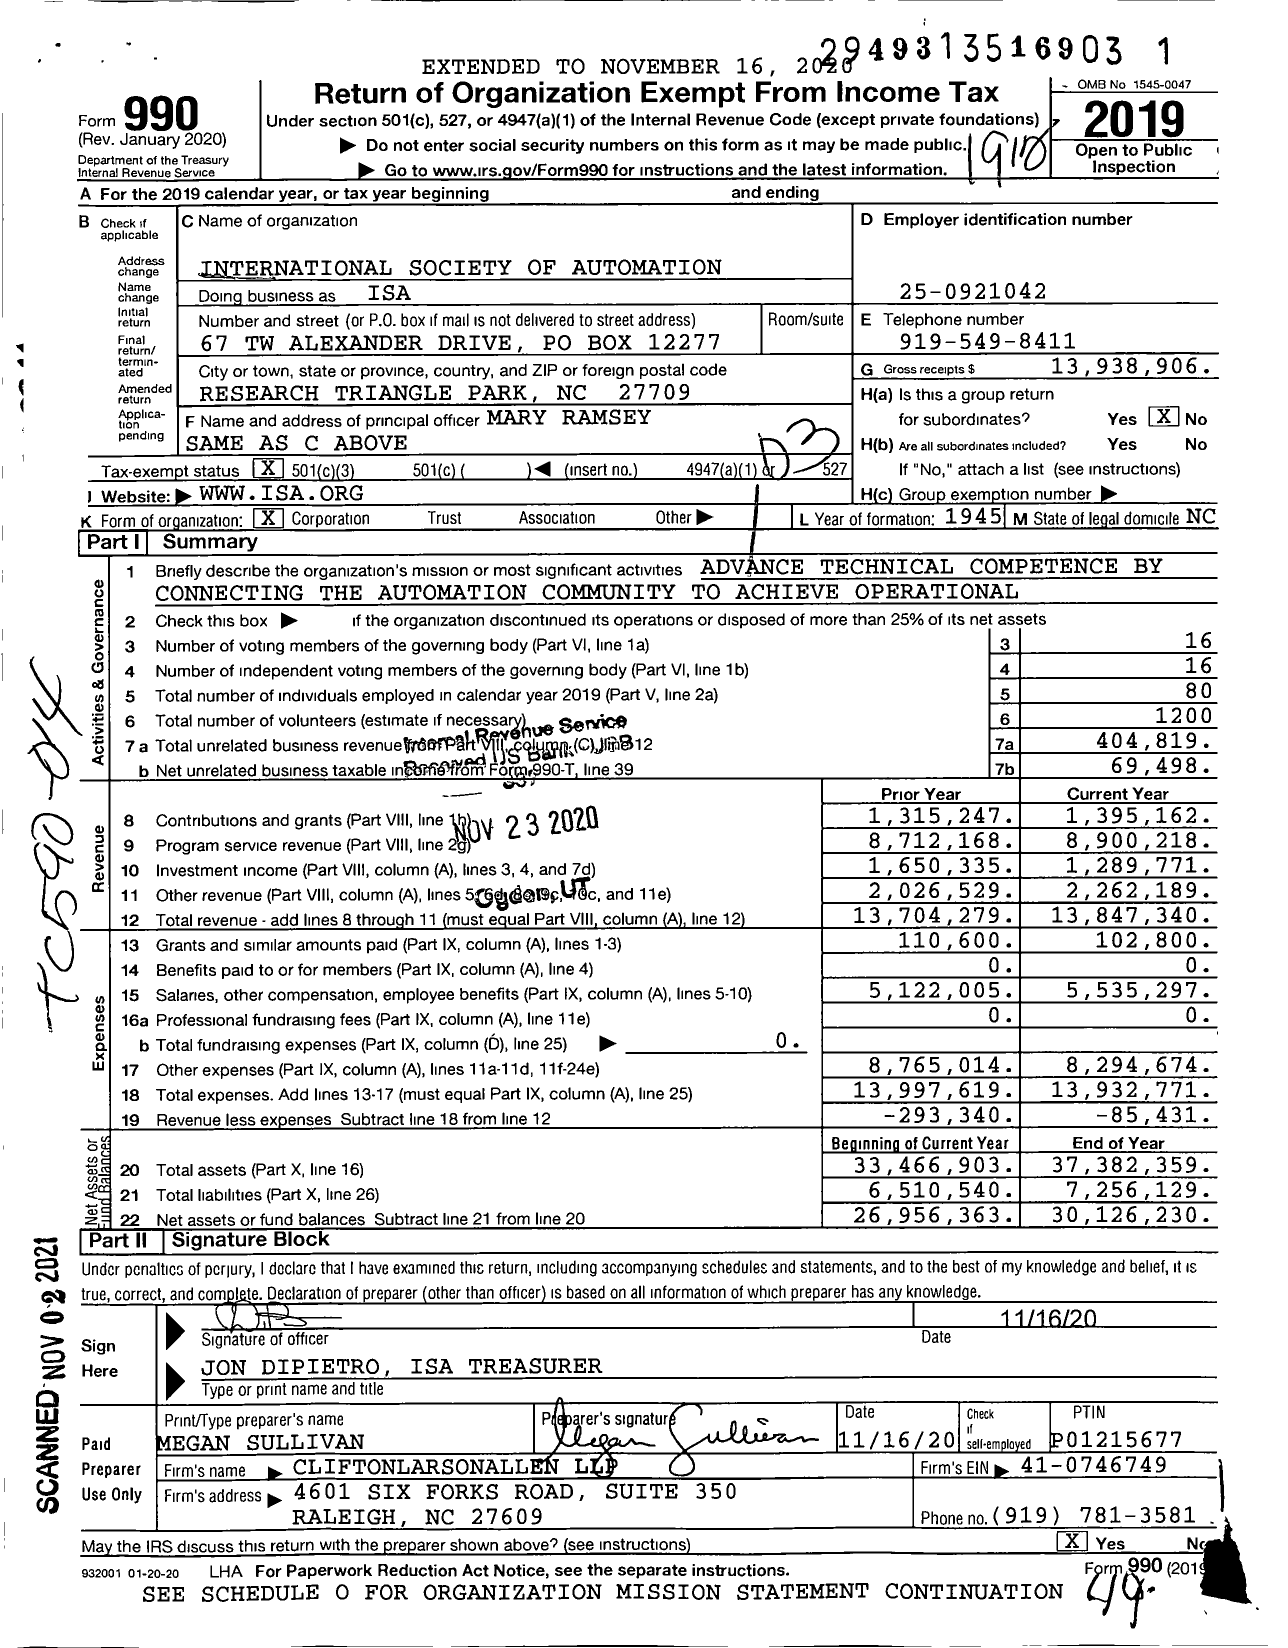 Image of first page of 2019 Form 990 for International Society of Automation (ISA)